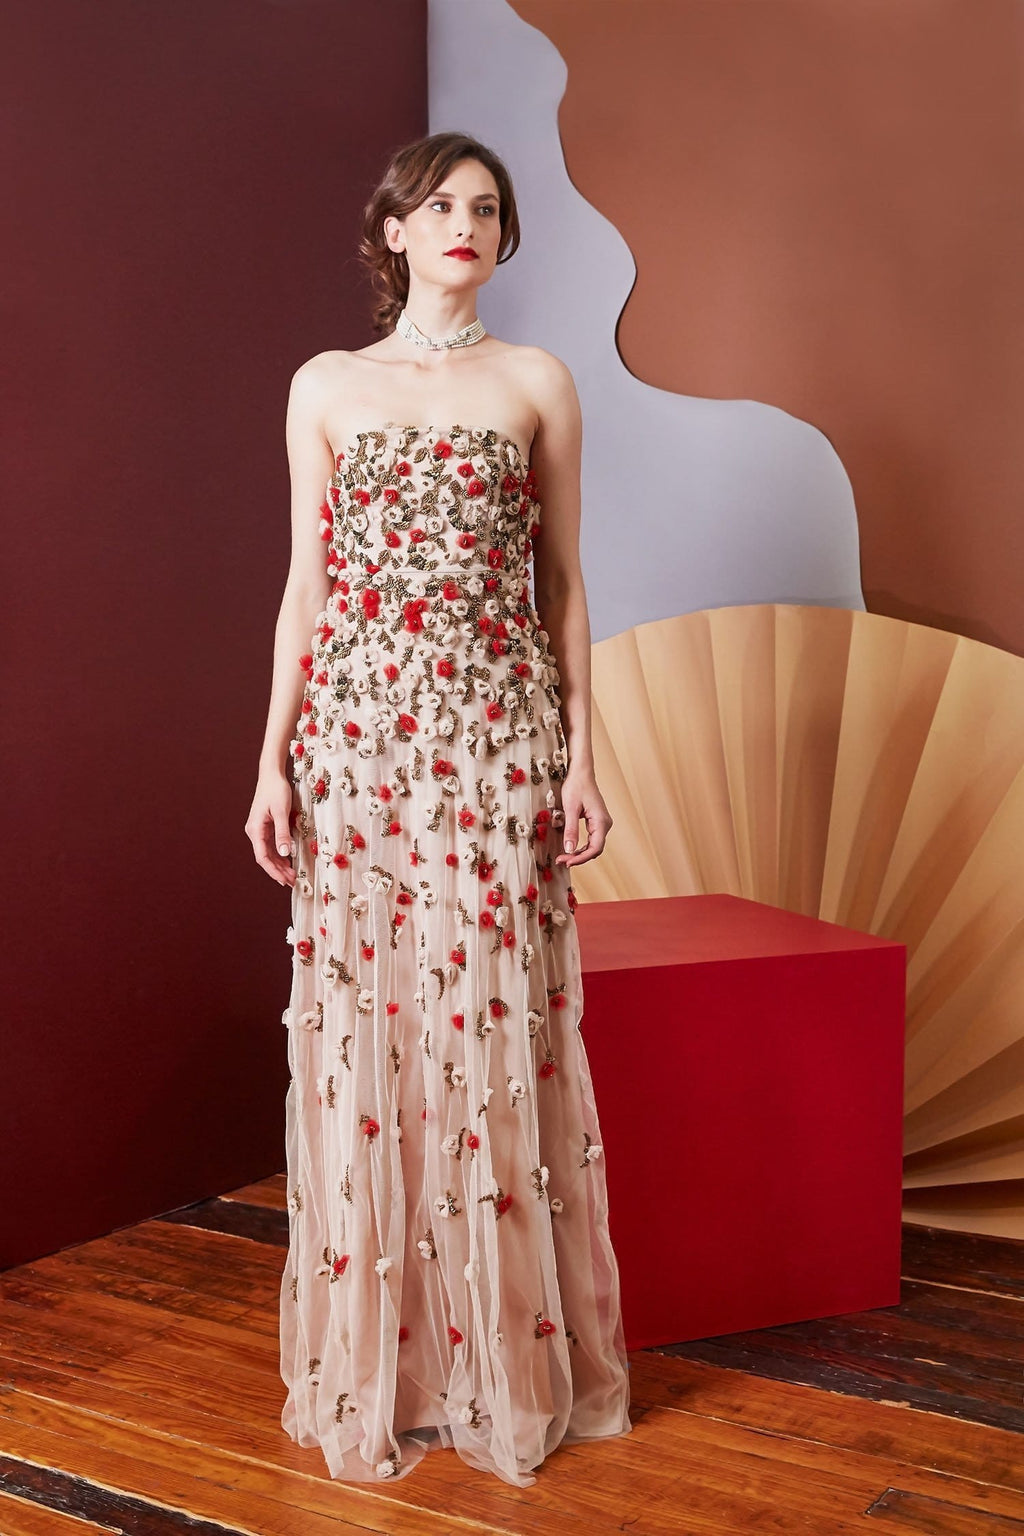 Lavanya Coodly Apparel & Accessories > Clothing > Dresses XS / Tan Lavanya Coodly Floral Maureen Nude Tulle Floor Length Gown with Hand Beading in Red, Nude, & Antique Gold